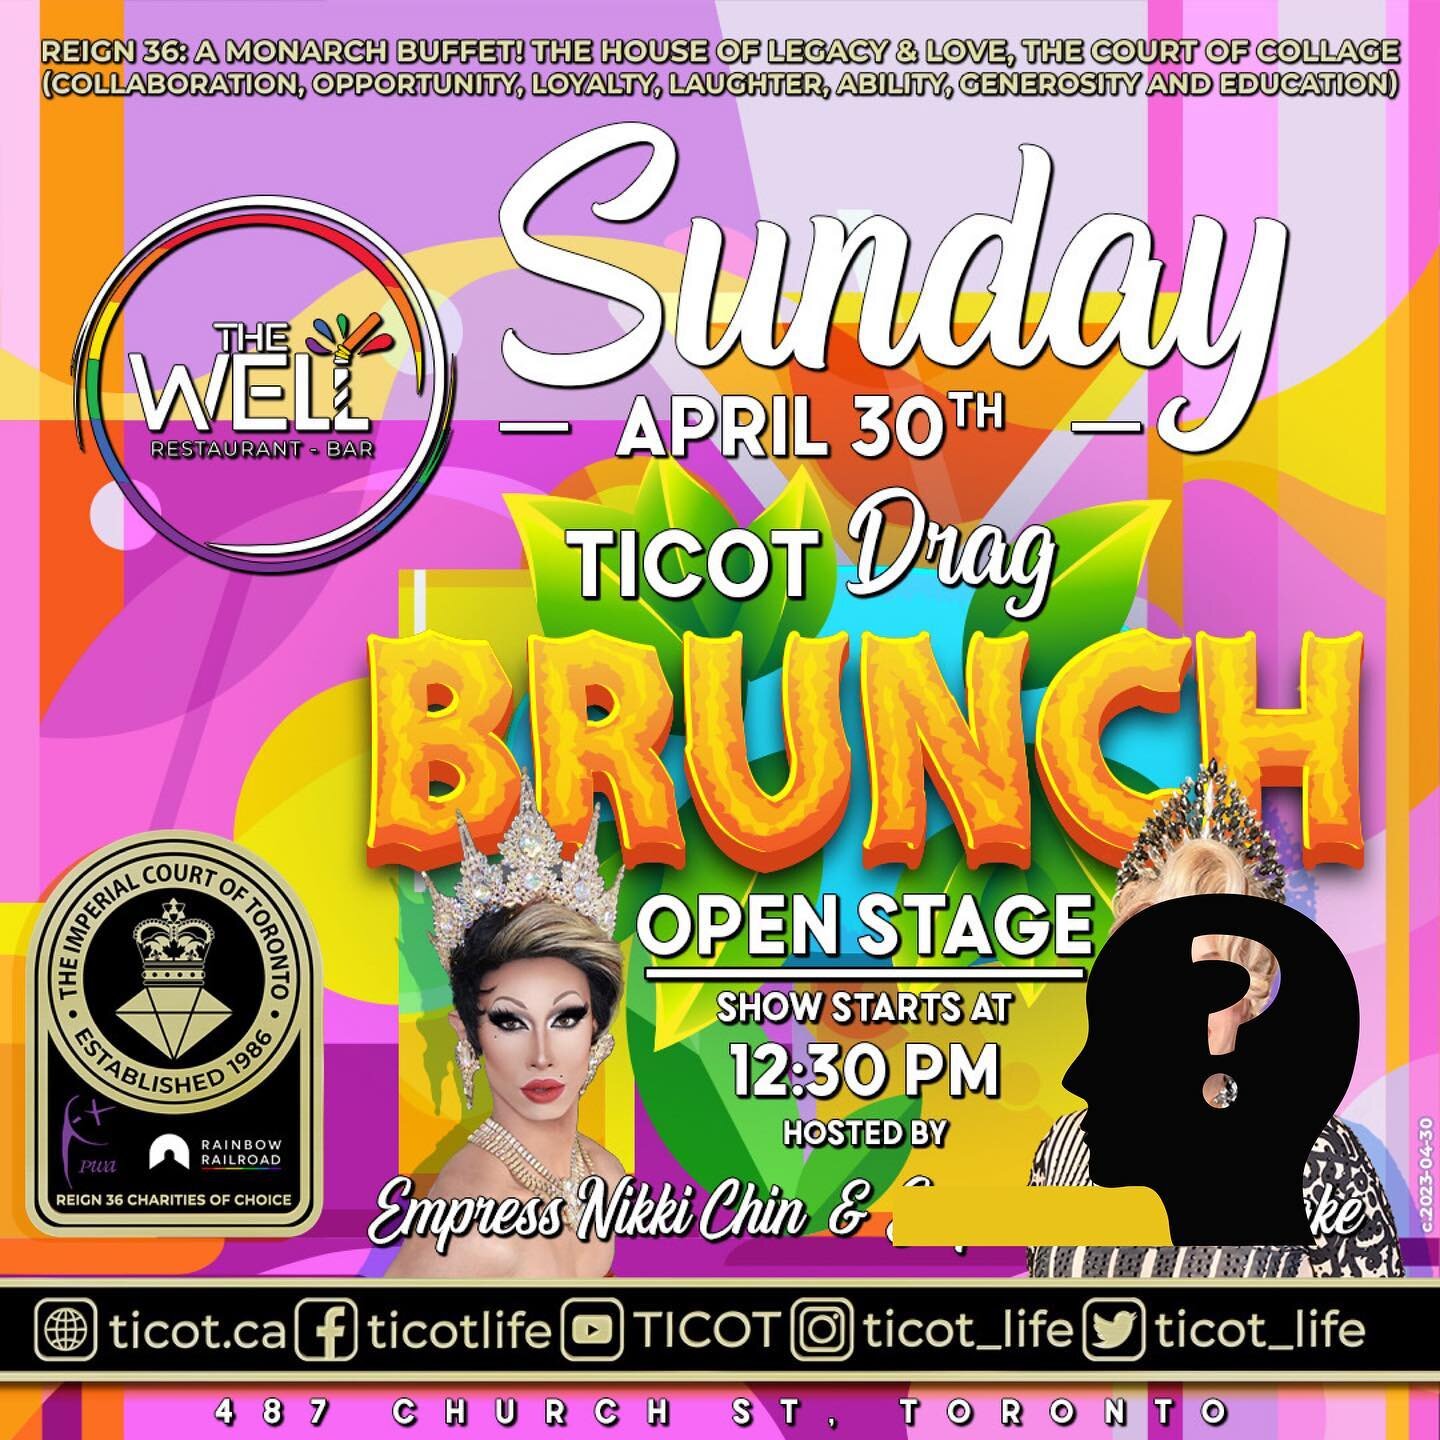 #sundayfunday
Get ready for another TICOT Brunch on Sunday!! Good eats, Good cause, great entertainment. Come on out to @the.well.toronto at 12:30pm for an open stage &ldquo;show us your talent&rdquo; fundraiser. Hosted by Empress @nikkichin89 and __